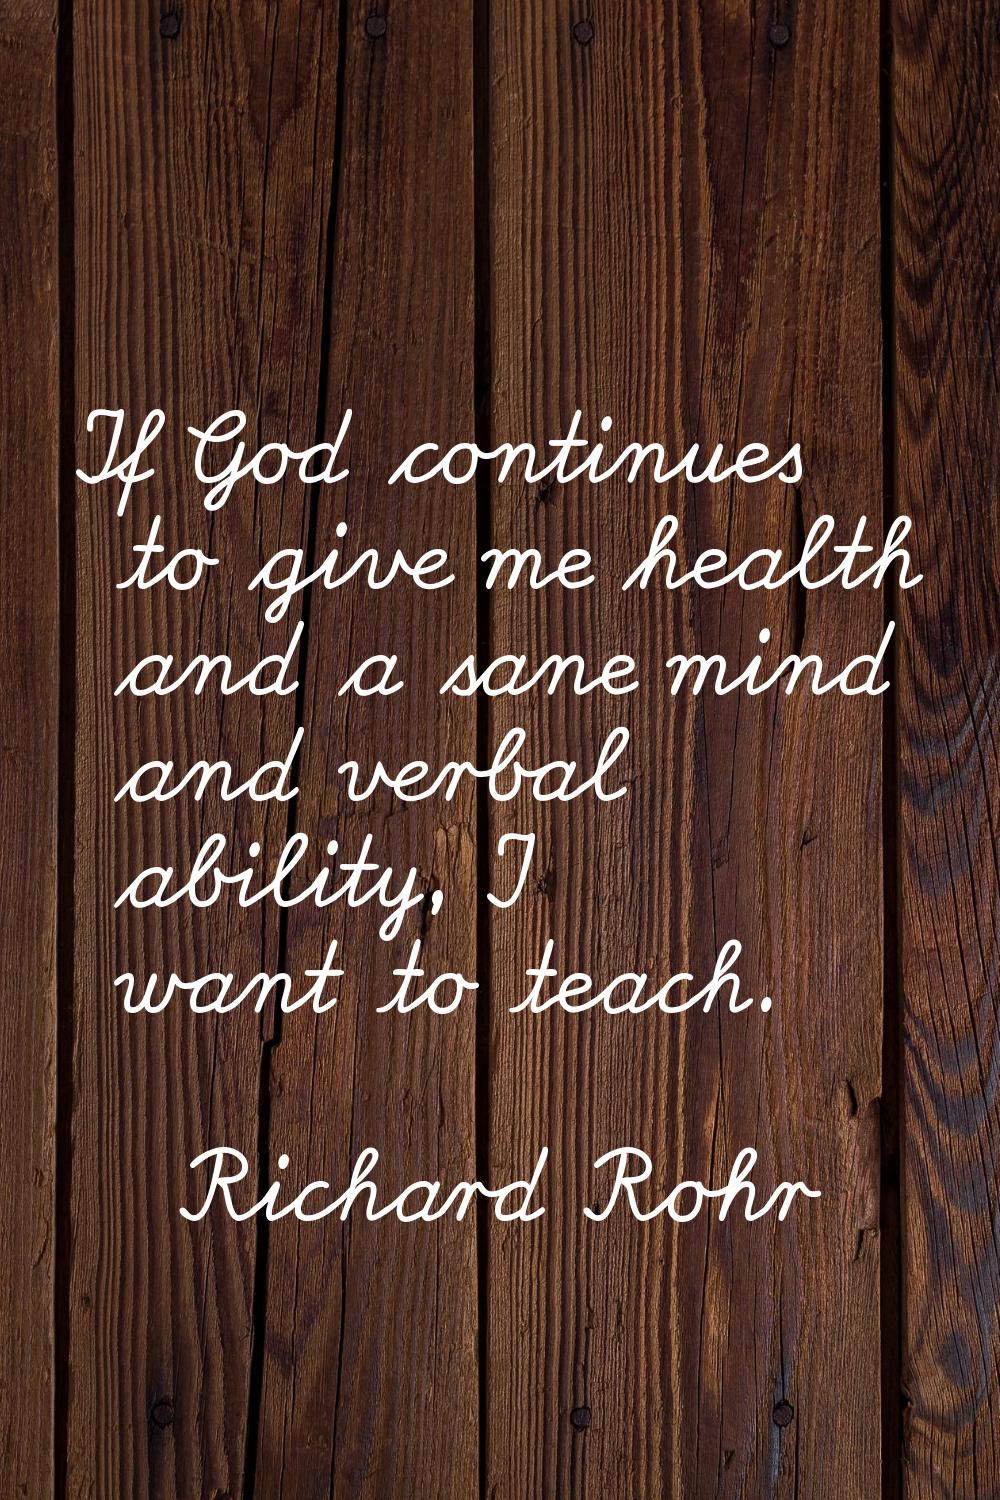 If God continues to give me health and a sane mind and verbal ability, I want to teach.